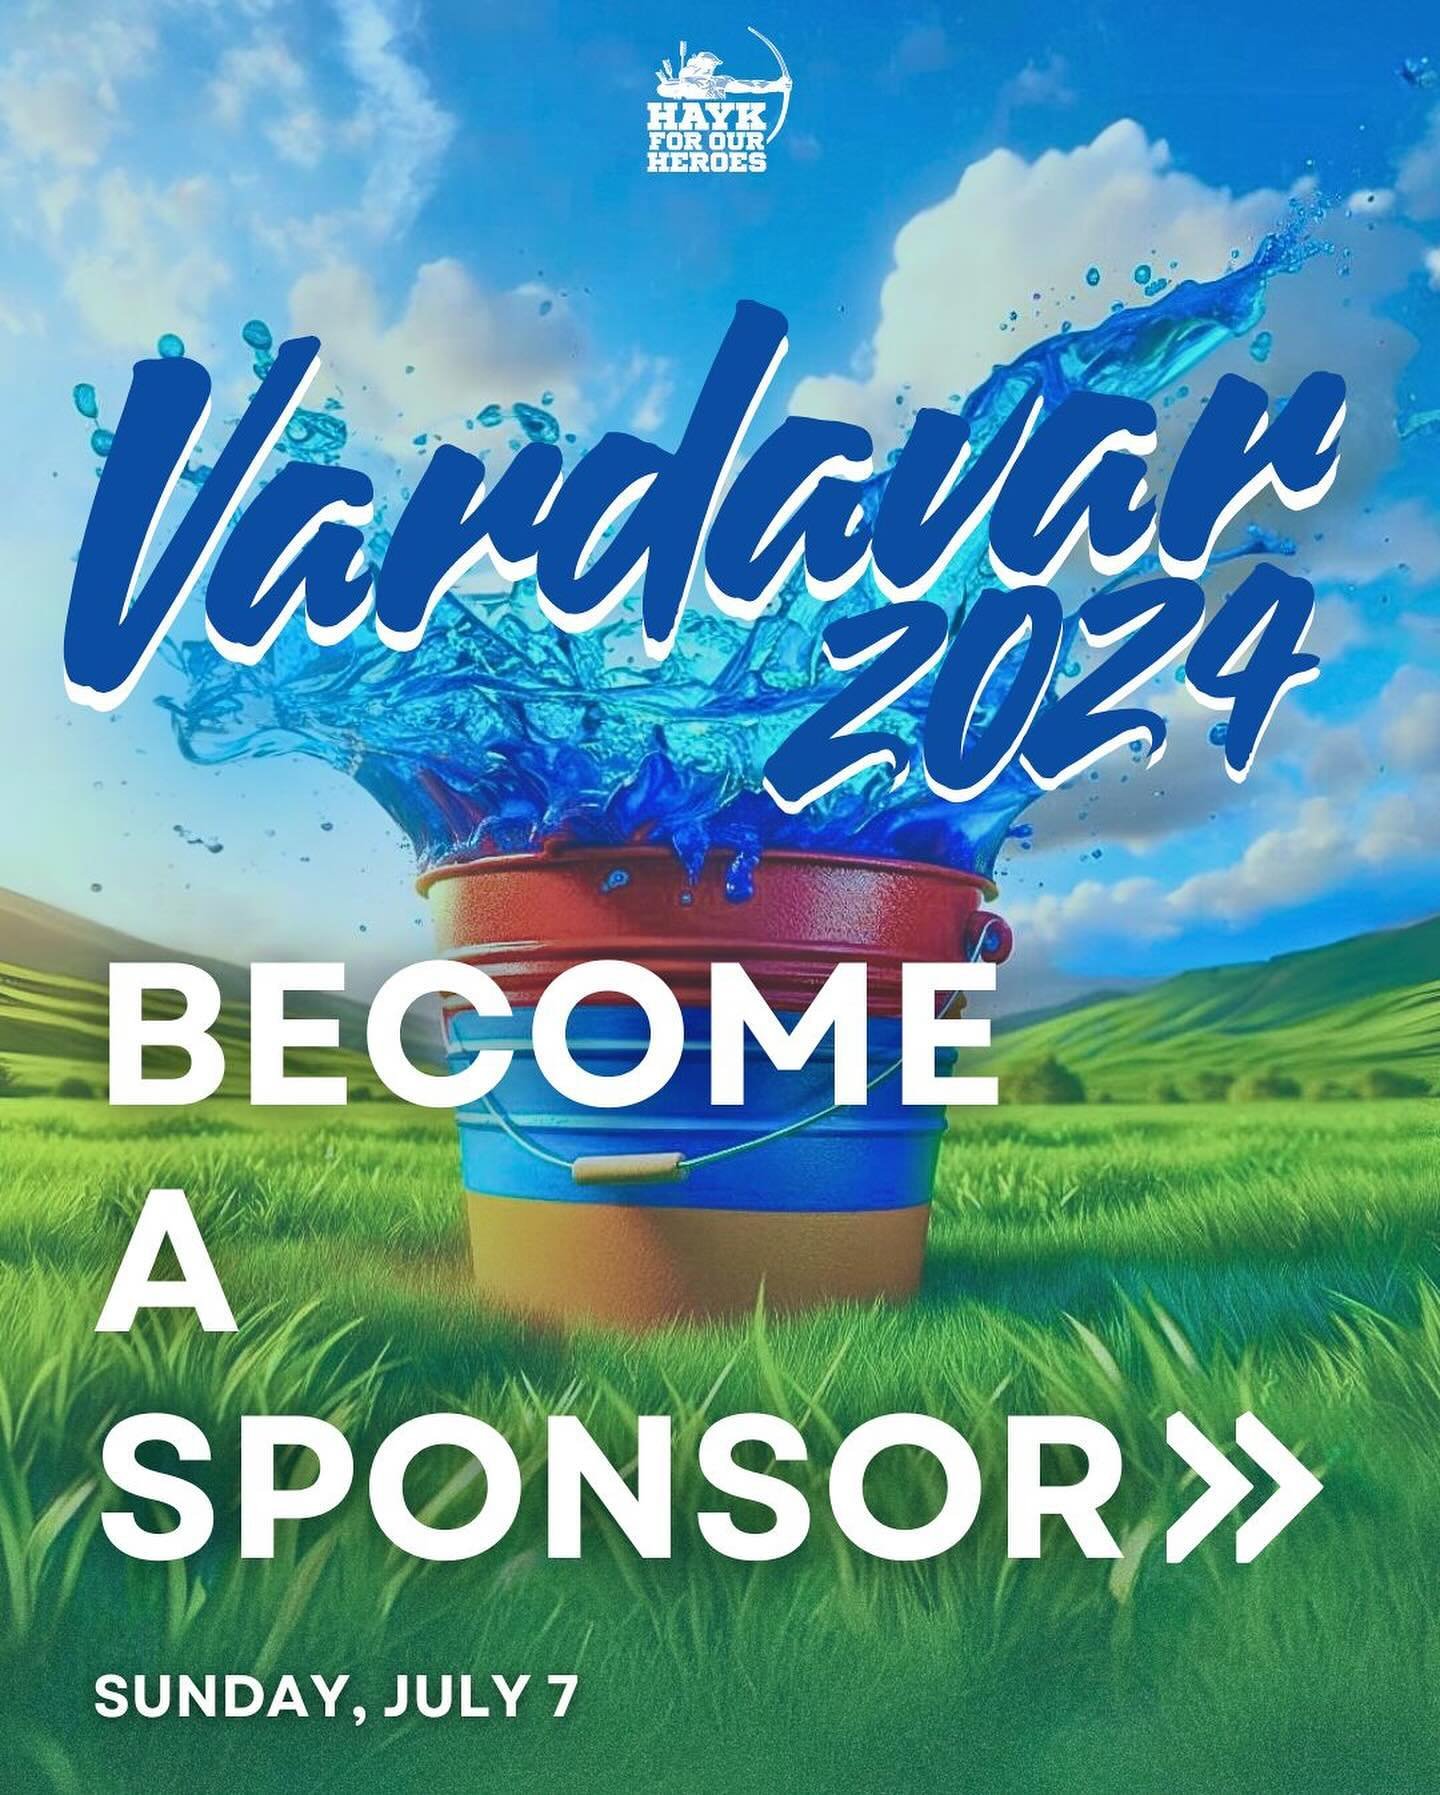 Vardavar 2024 vendor and sponsorship packages. 
For inquiries please email events@haykforourheroes.org 💦

Hayk for our Heroes is a 501(c)(3) nonprofit organization. All donations made to HFOH are tax-deductible. 

#haykforourheroes #hfoh #community 